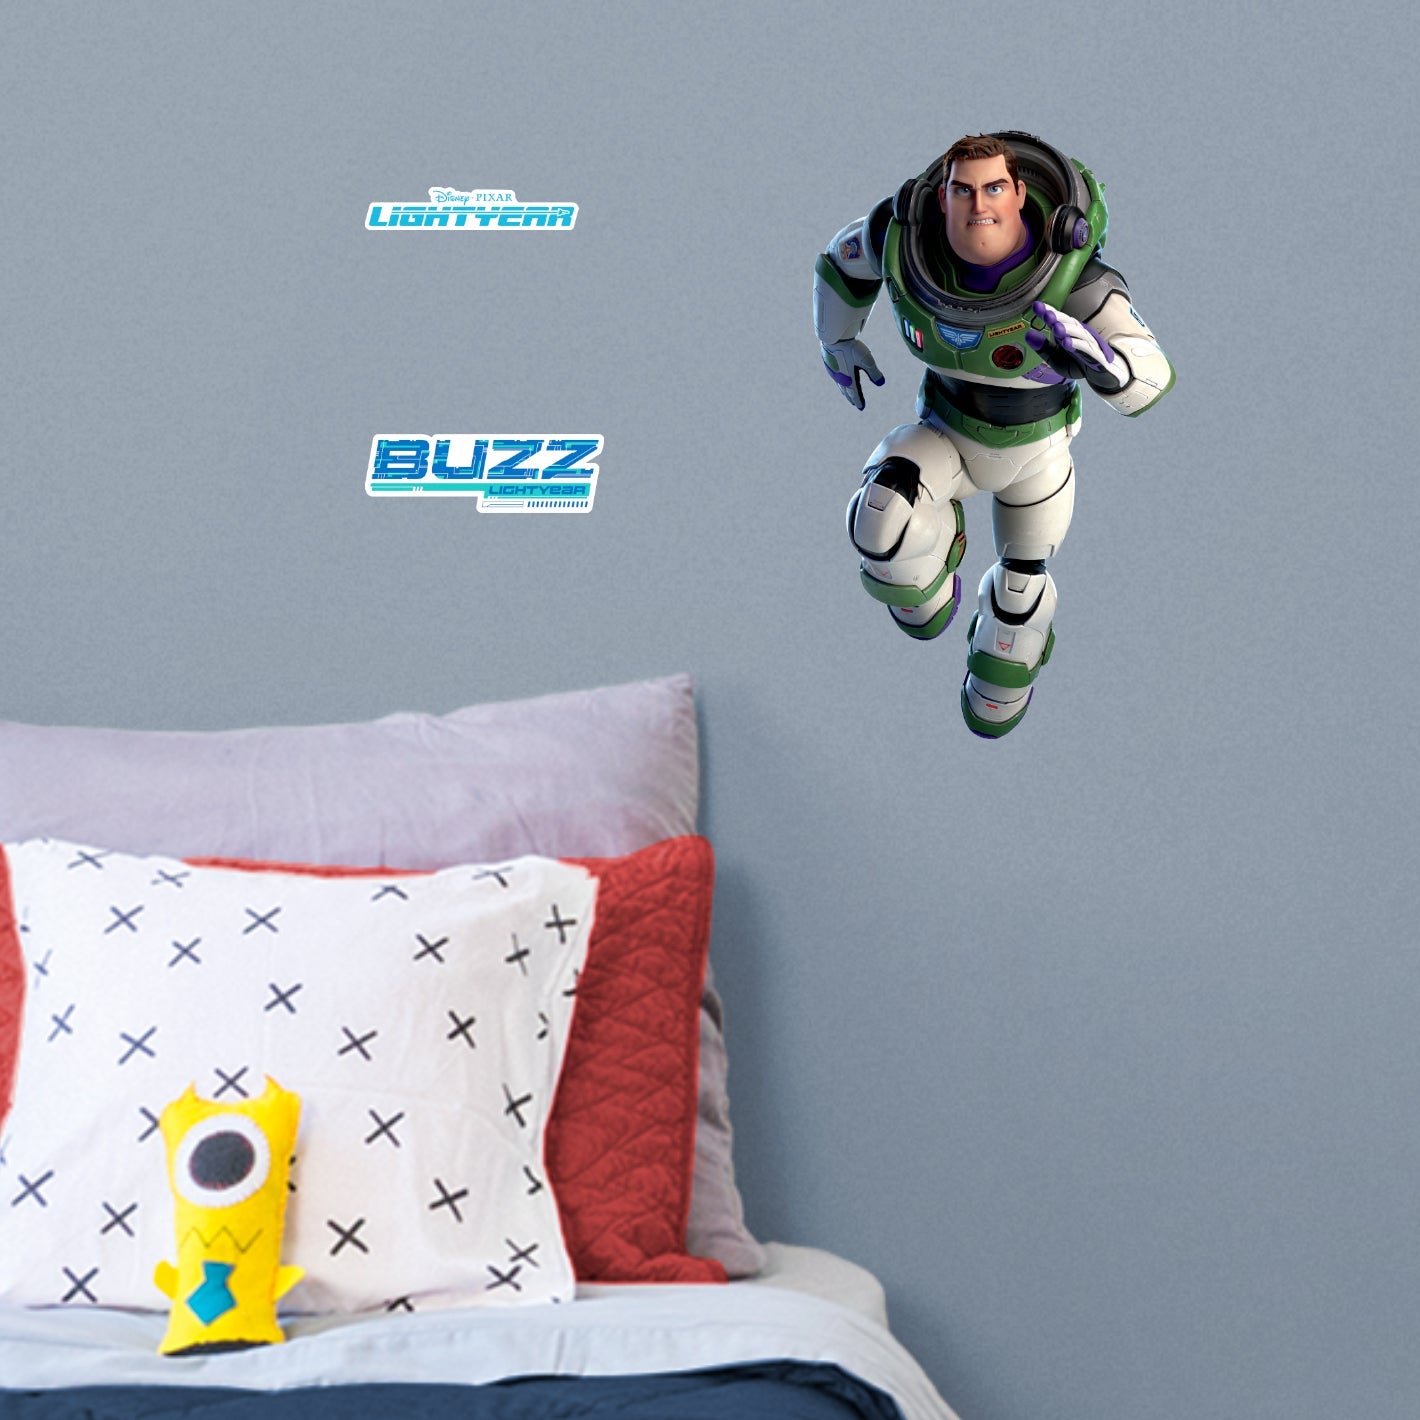 Lightyear: Buzz Lightyear Alpha Suit RealBig - Officially Licensed Disney Removable Adhesive Decal